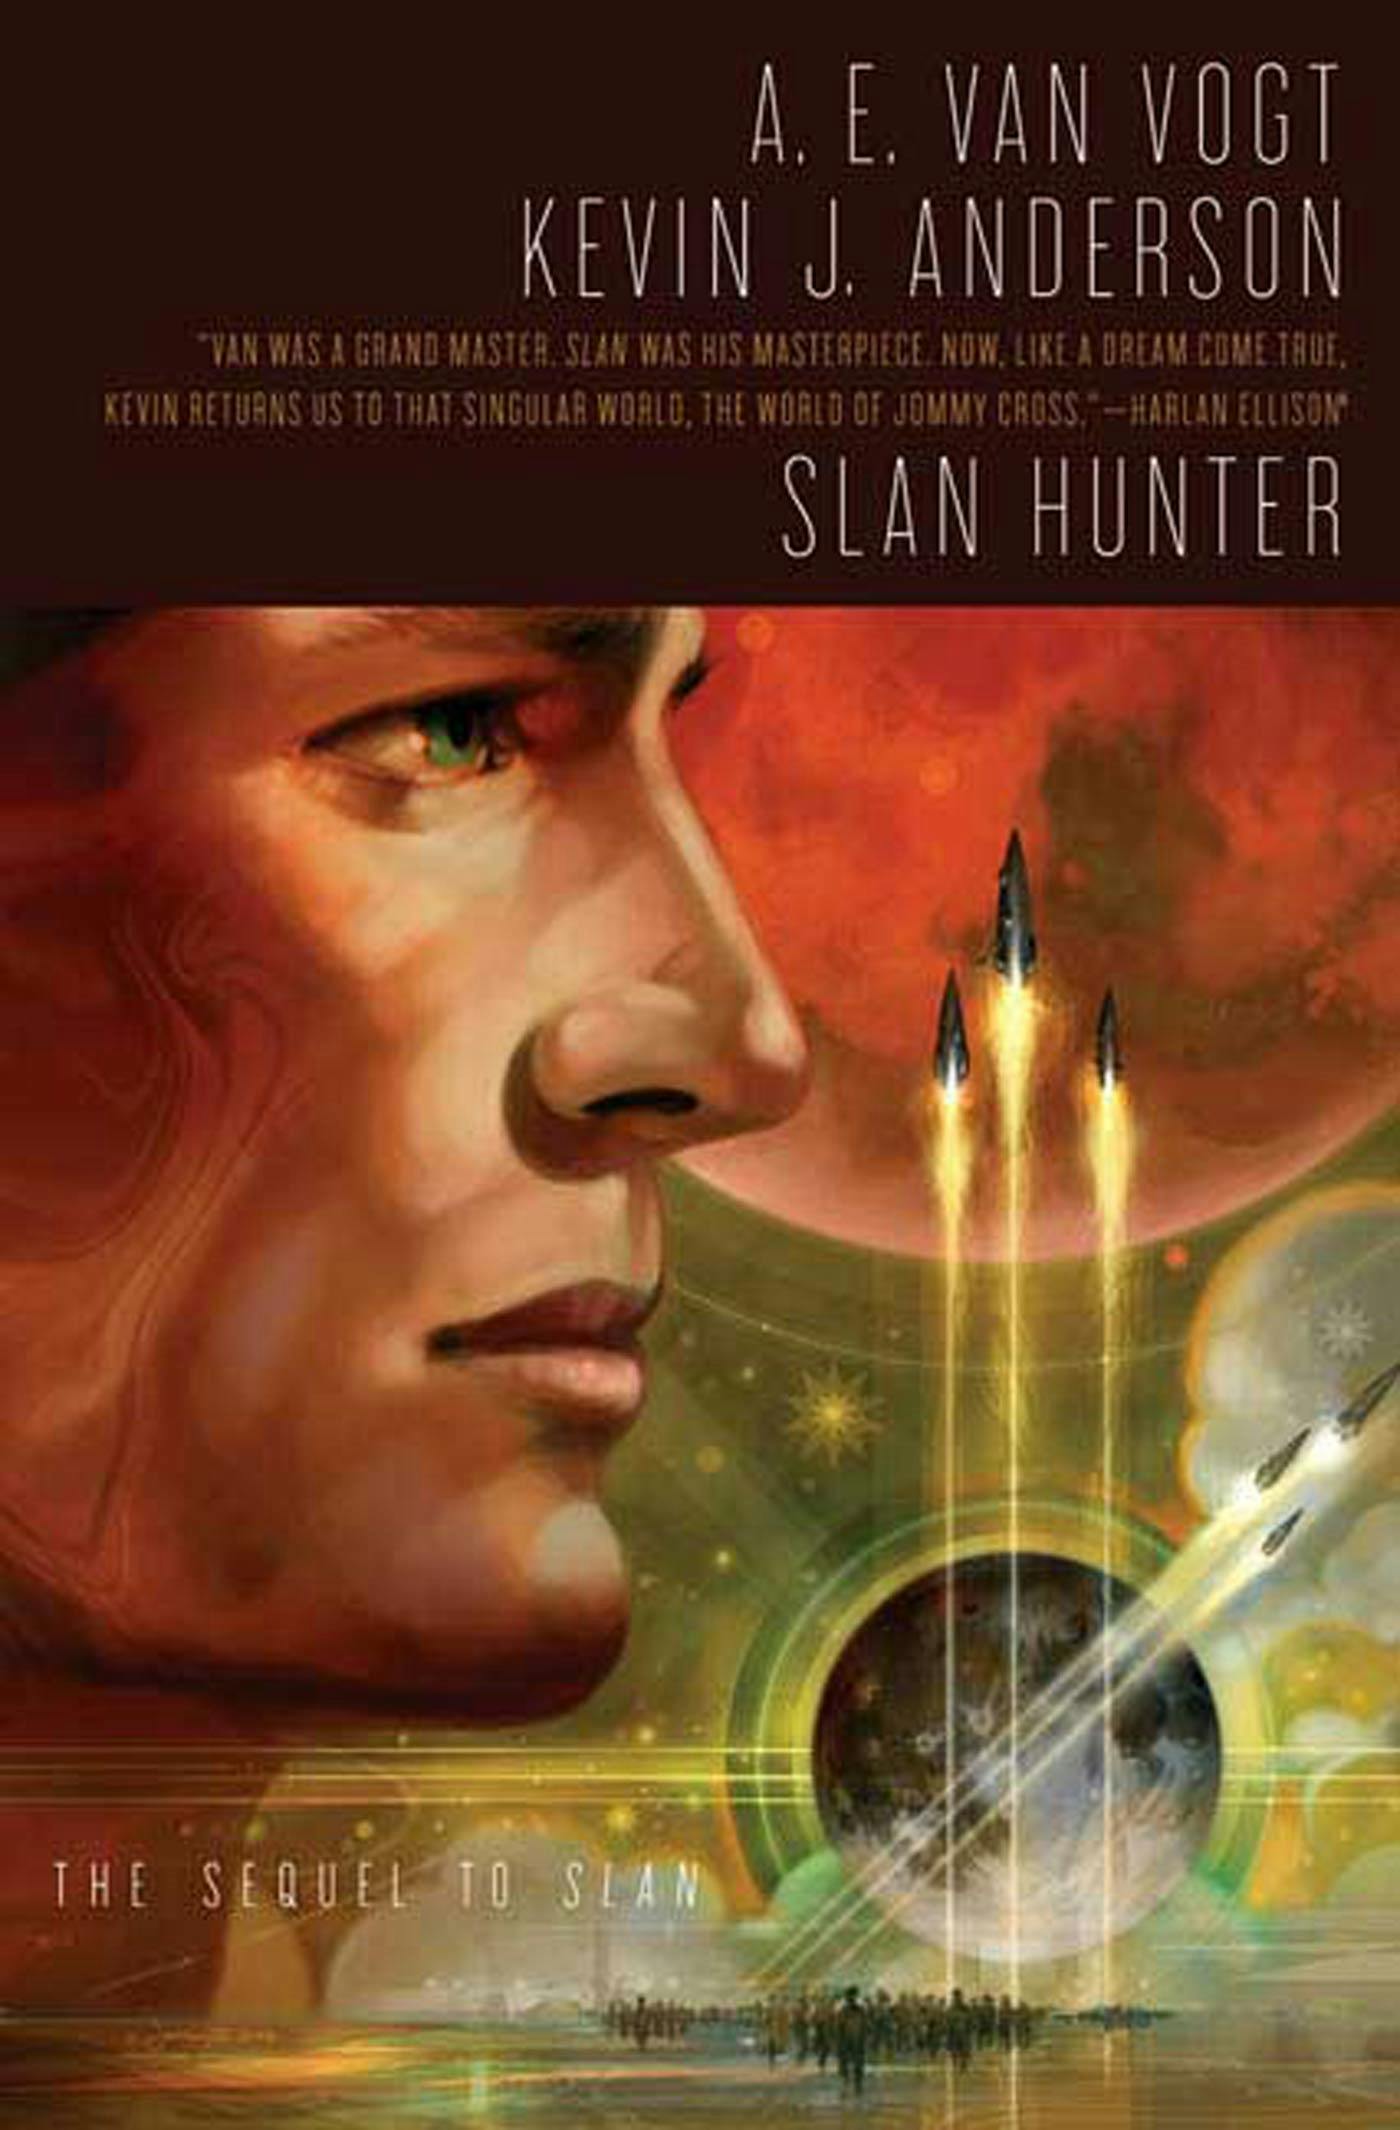 Cover for the book titled as: Slan Hunter